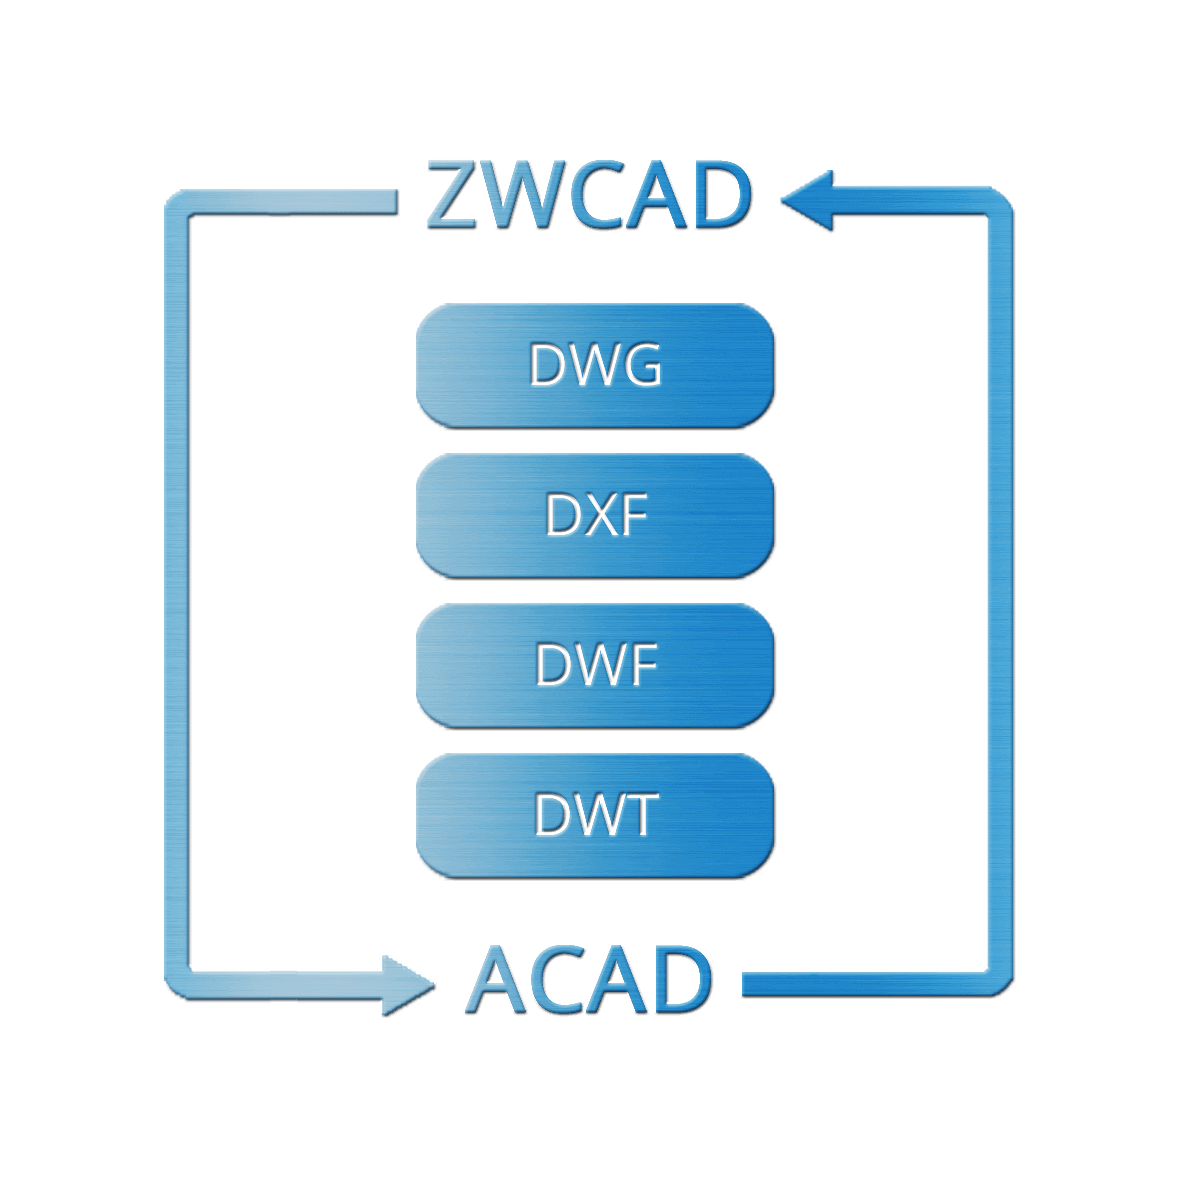 Open or save DWG／DXF drawings from ACAD